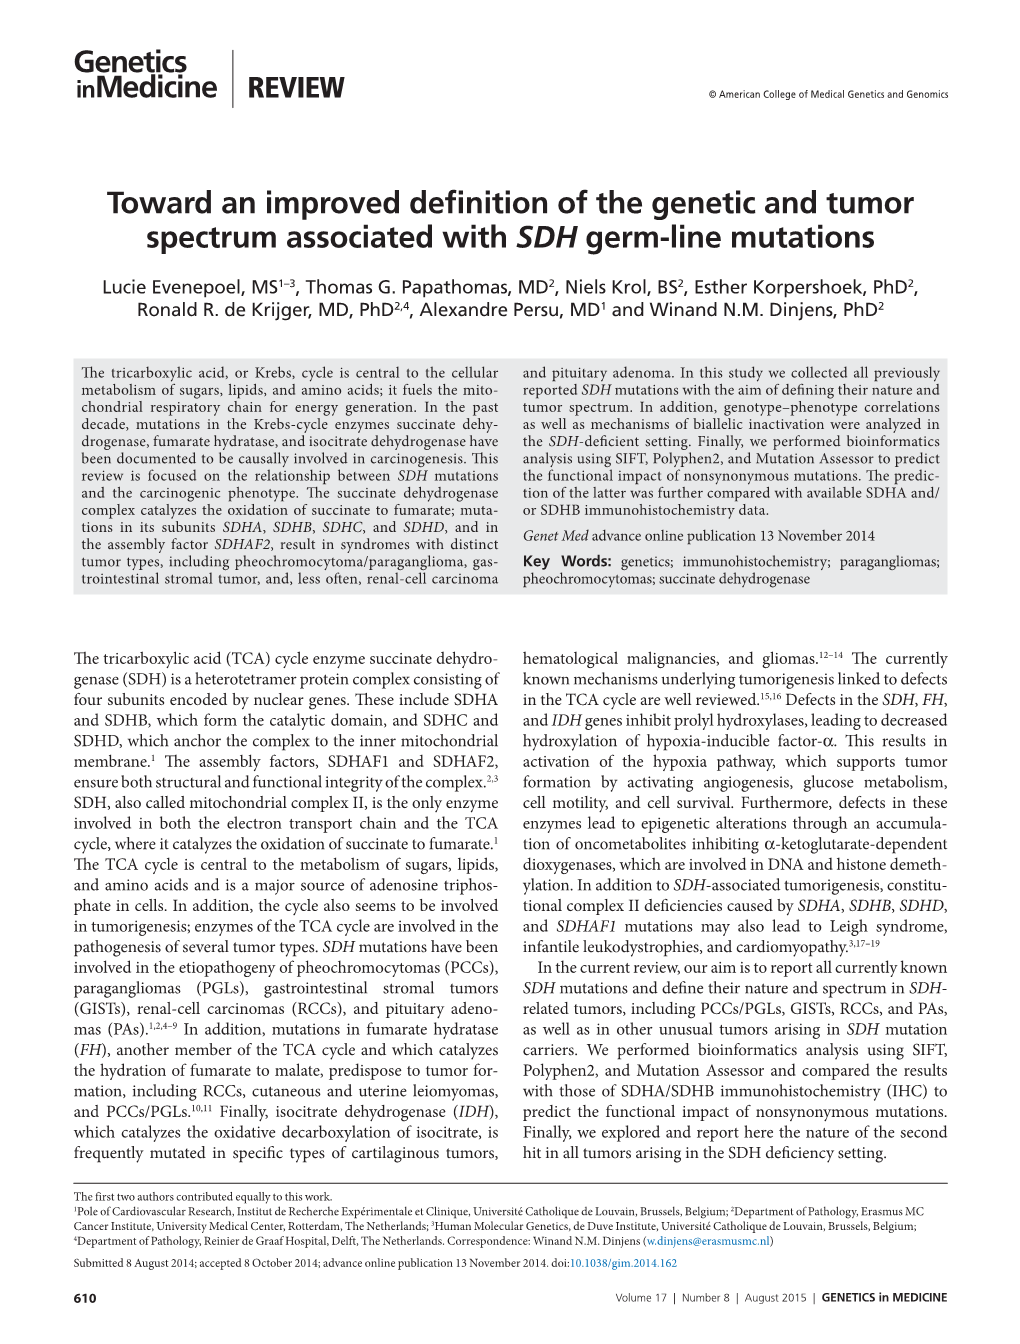 Toward an Improved Definition of the Genetic and Tumor Spectrum Associated with SDH Germ-Line Mutations